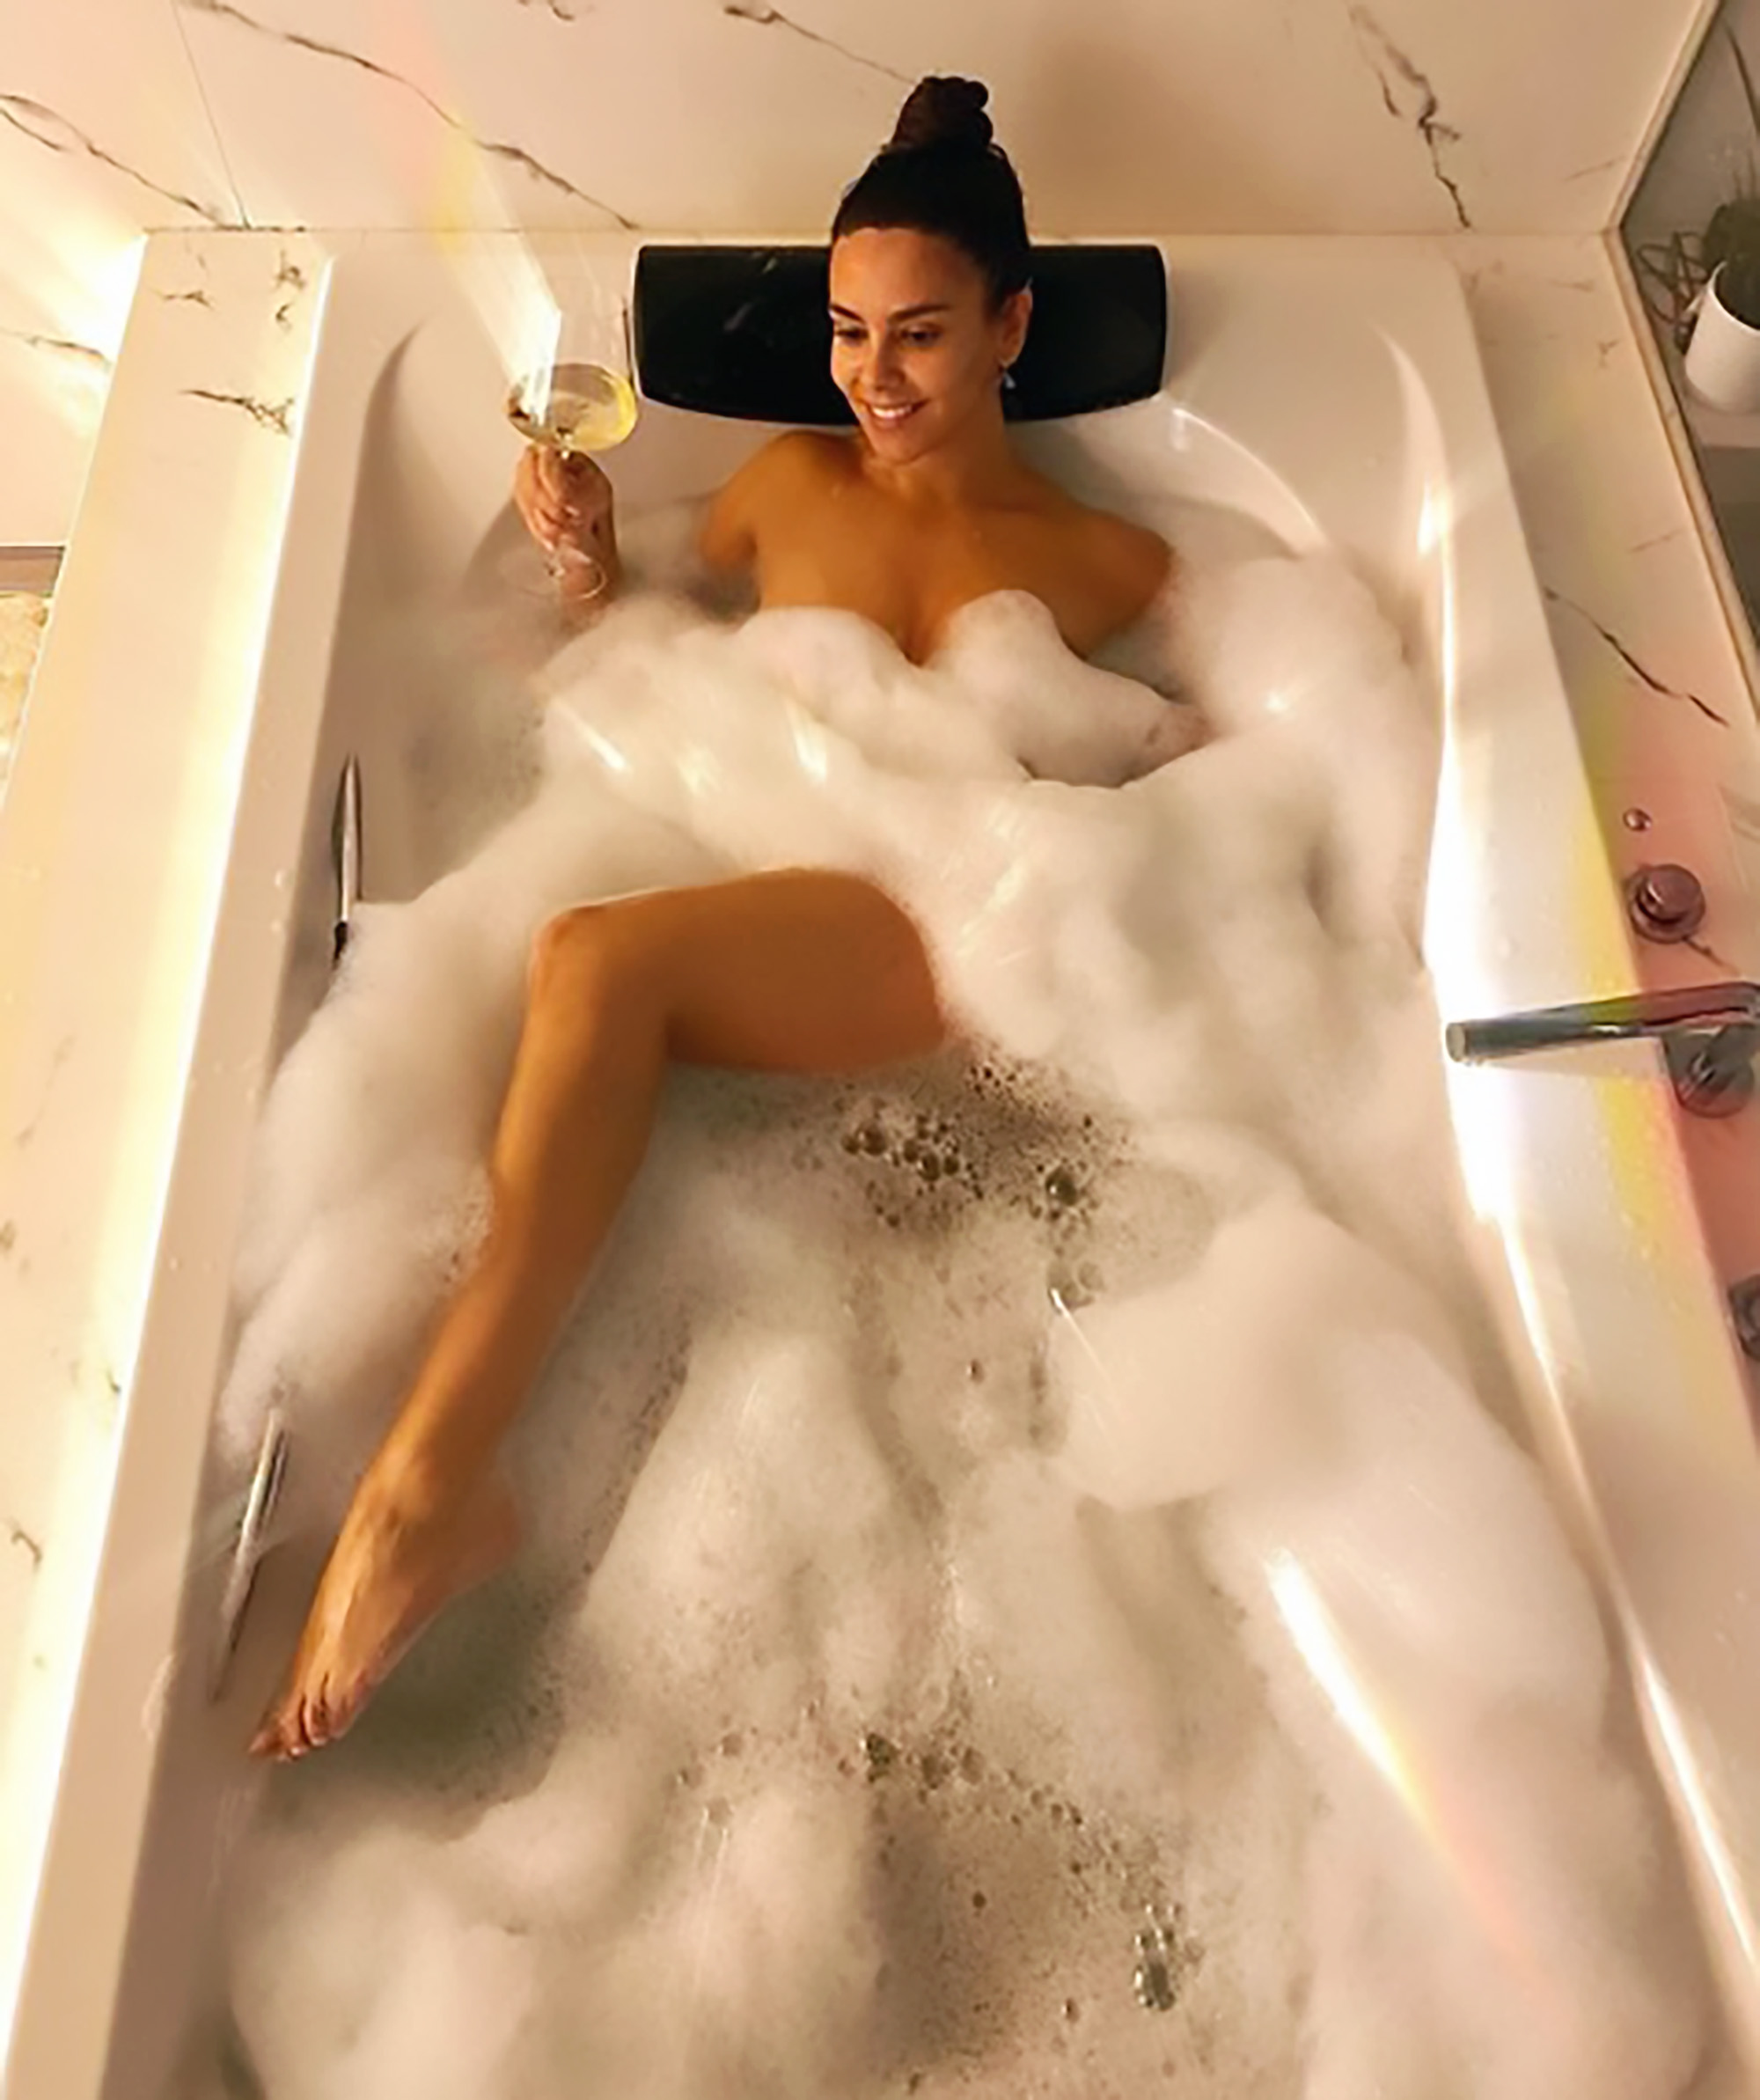 Read more about the article Spanish Star Poses Nude In Bath With Glass Of Champers